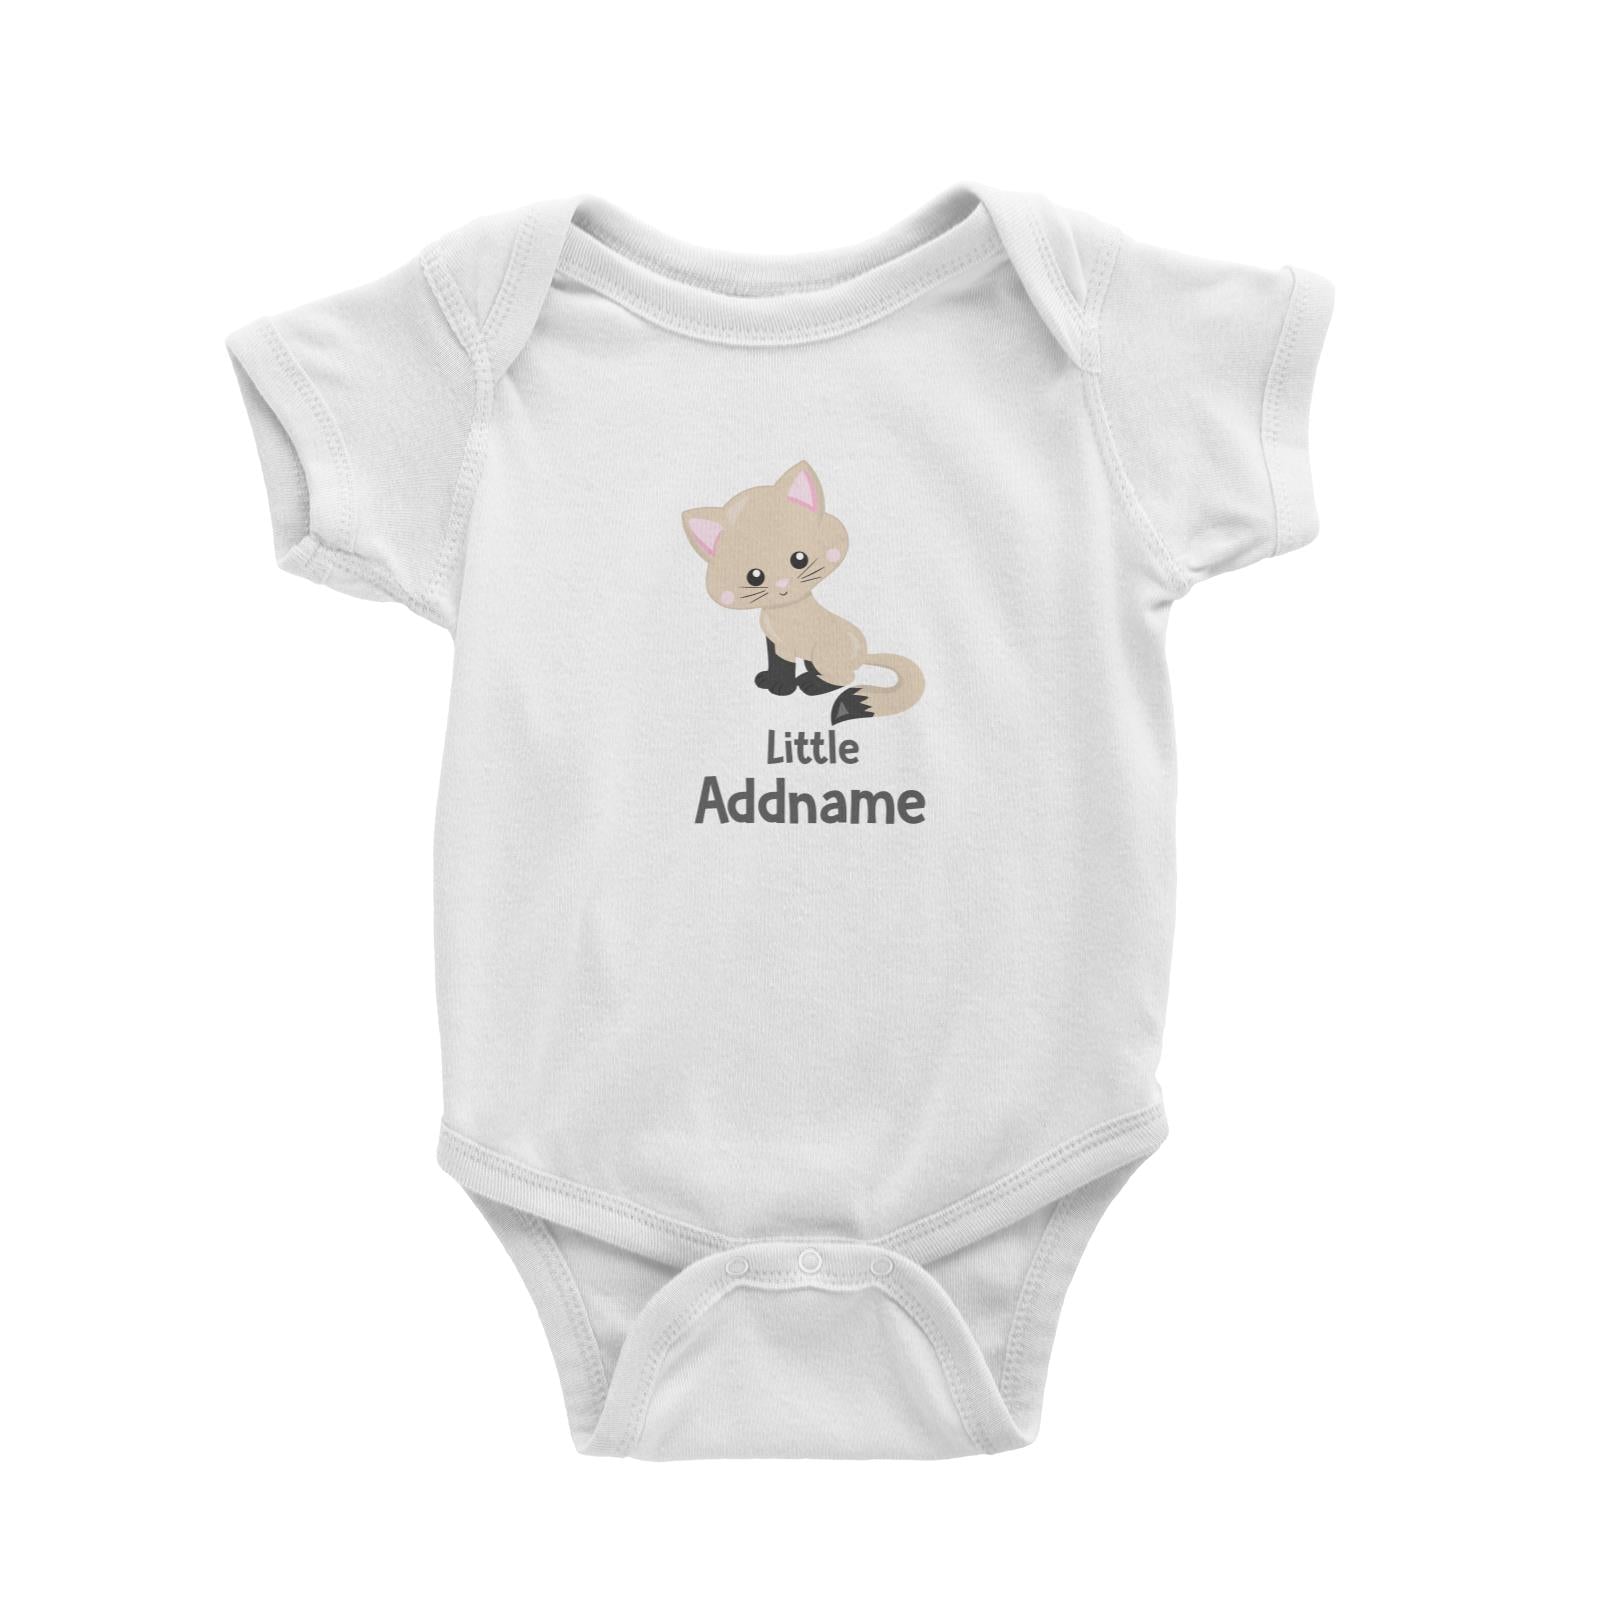 Adorable Cats Light Brown Cat with Black Legs Little Addname White Baby Romper